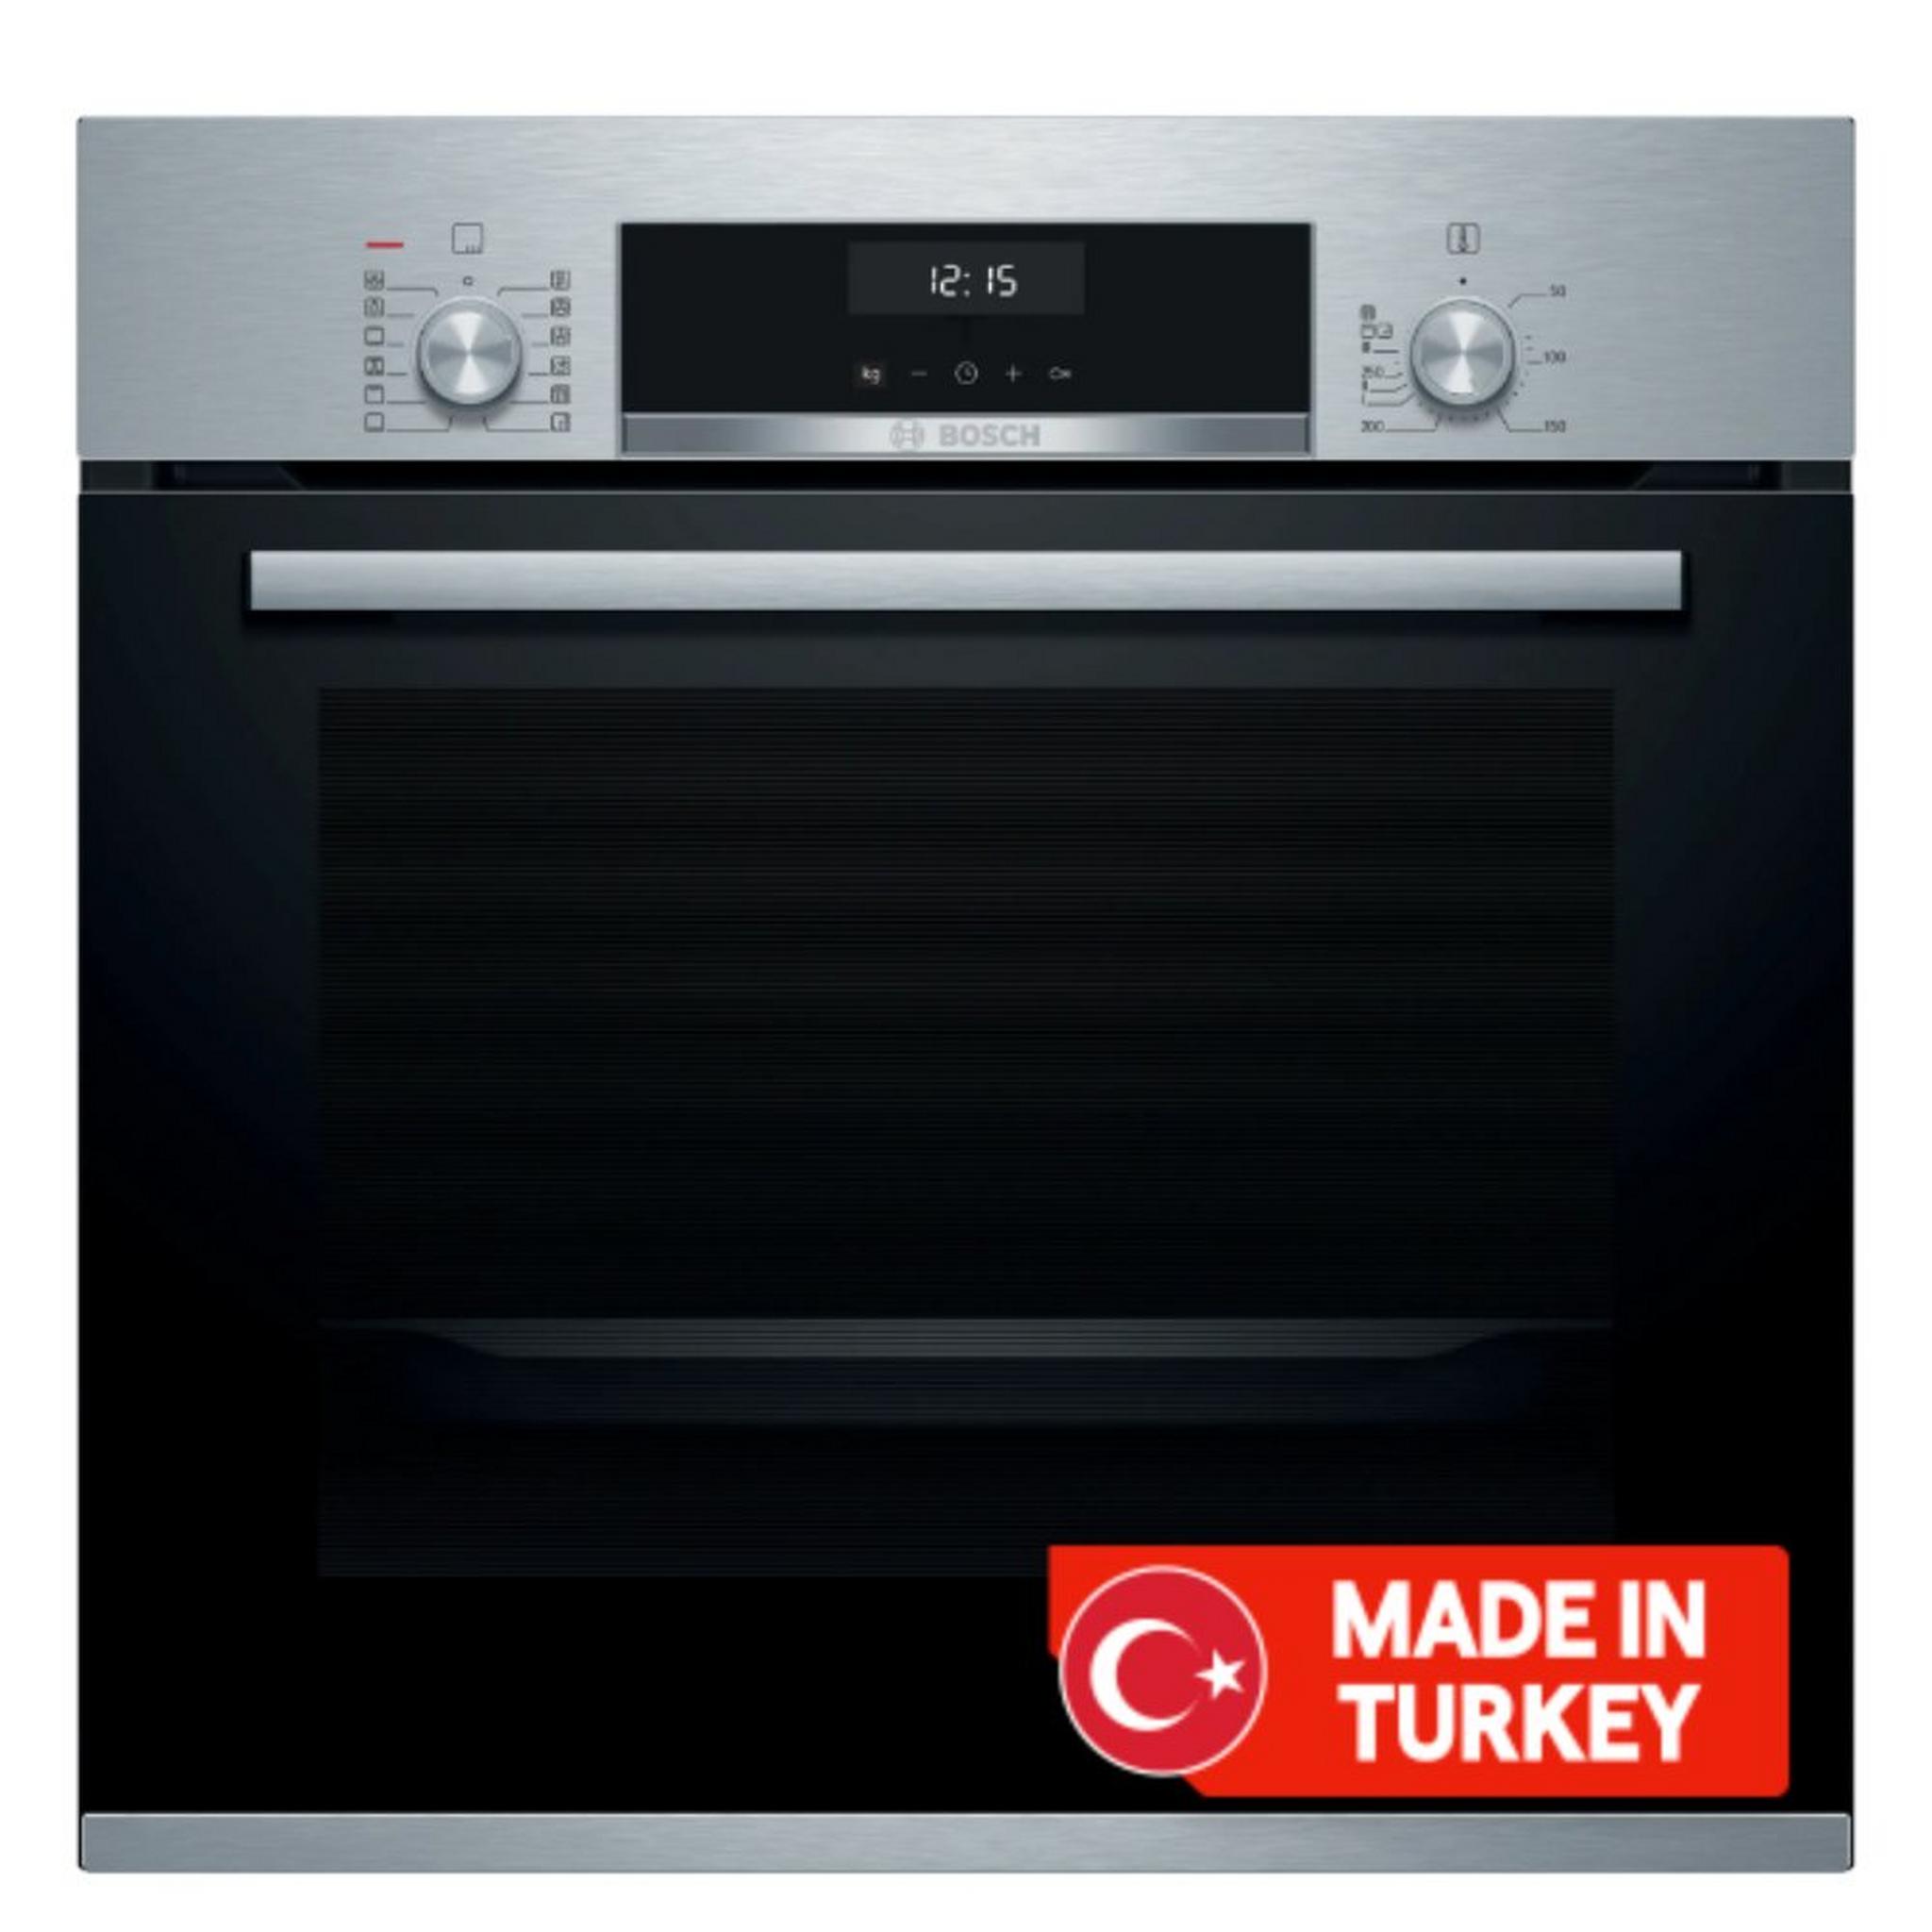 Bosch Built-in Oven with Added Steam Function, 60 x 60 cm, HIJ557YS0M - Stainless steel